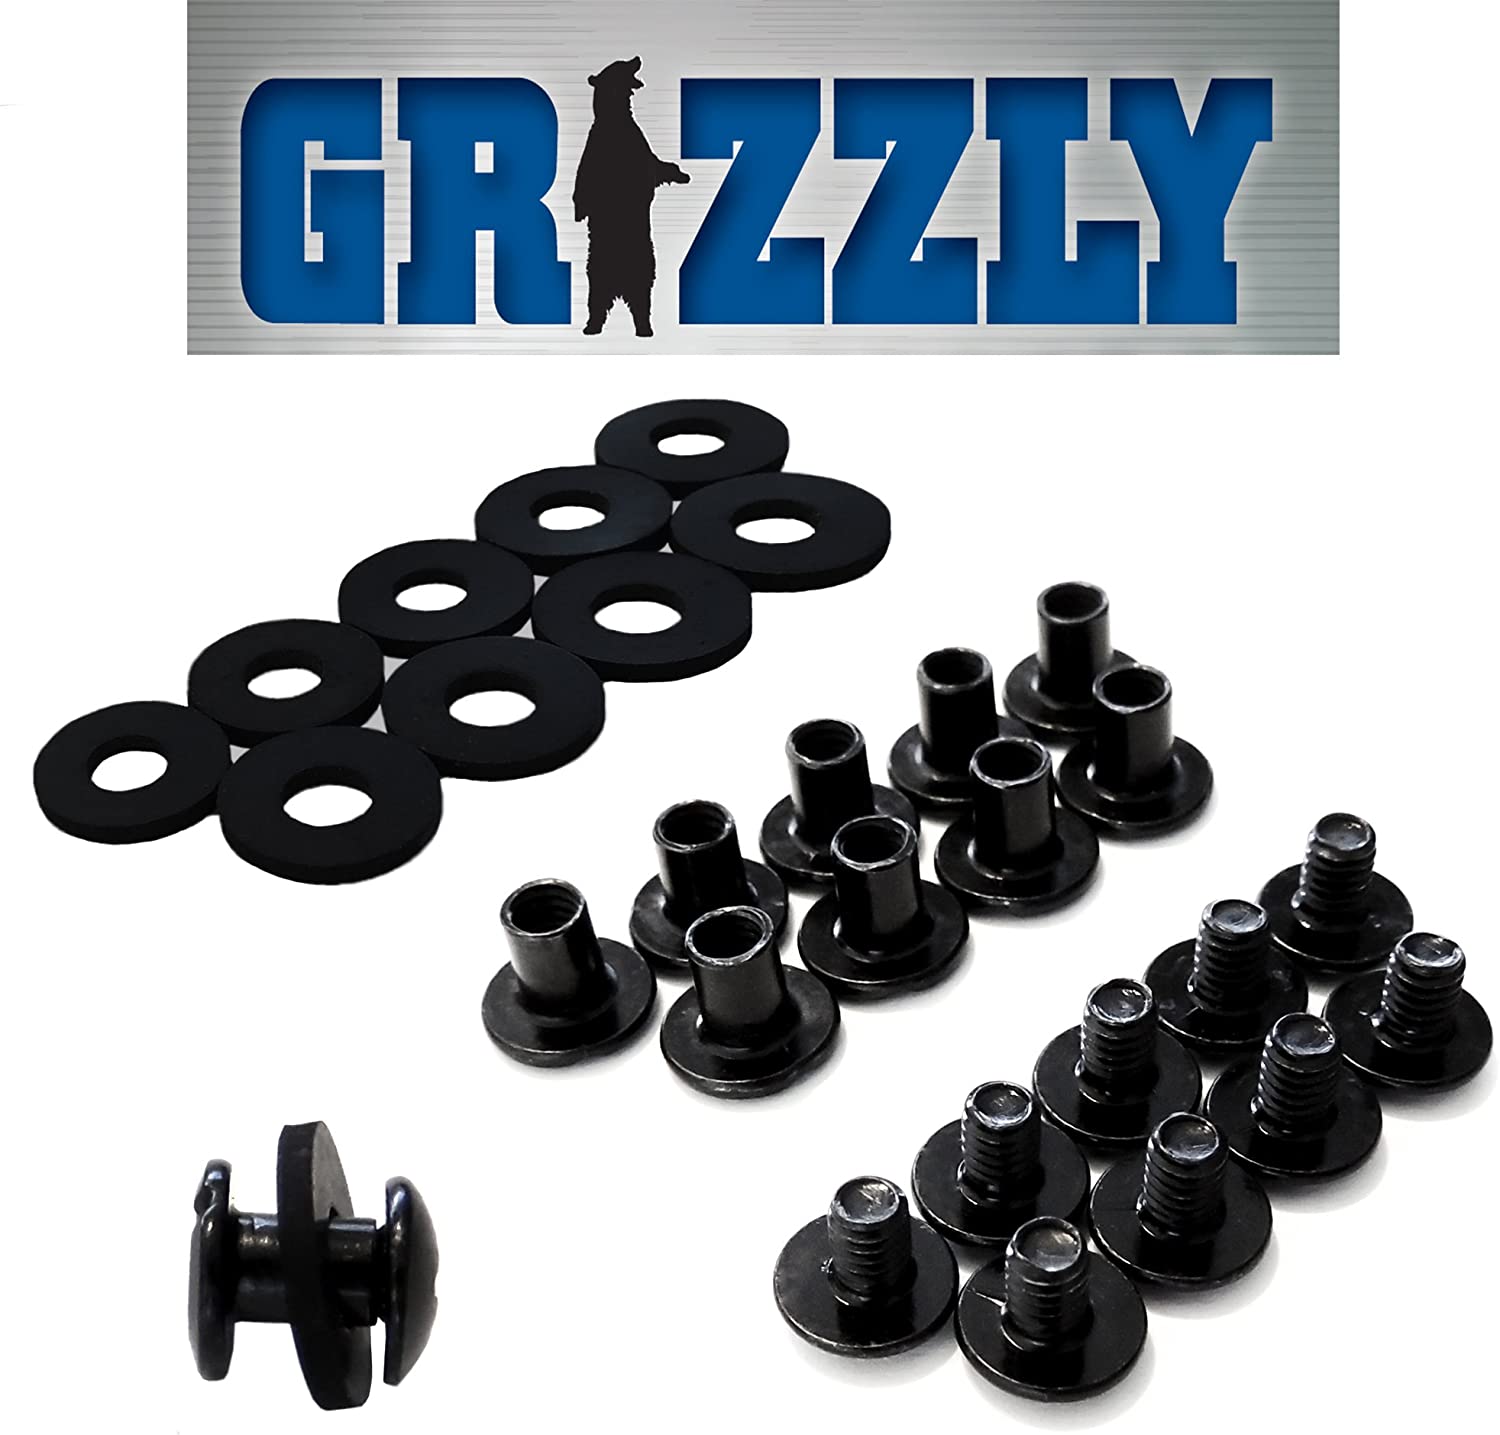 Grizzly Black Chicago Screws For Leather/Kydex Gun Holsters/Clips and Knife Sheaths 1/4 Inch - 50 Pack